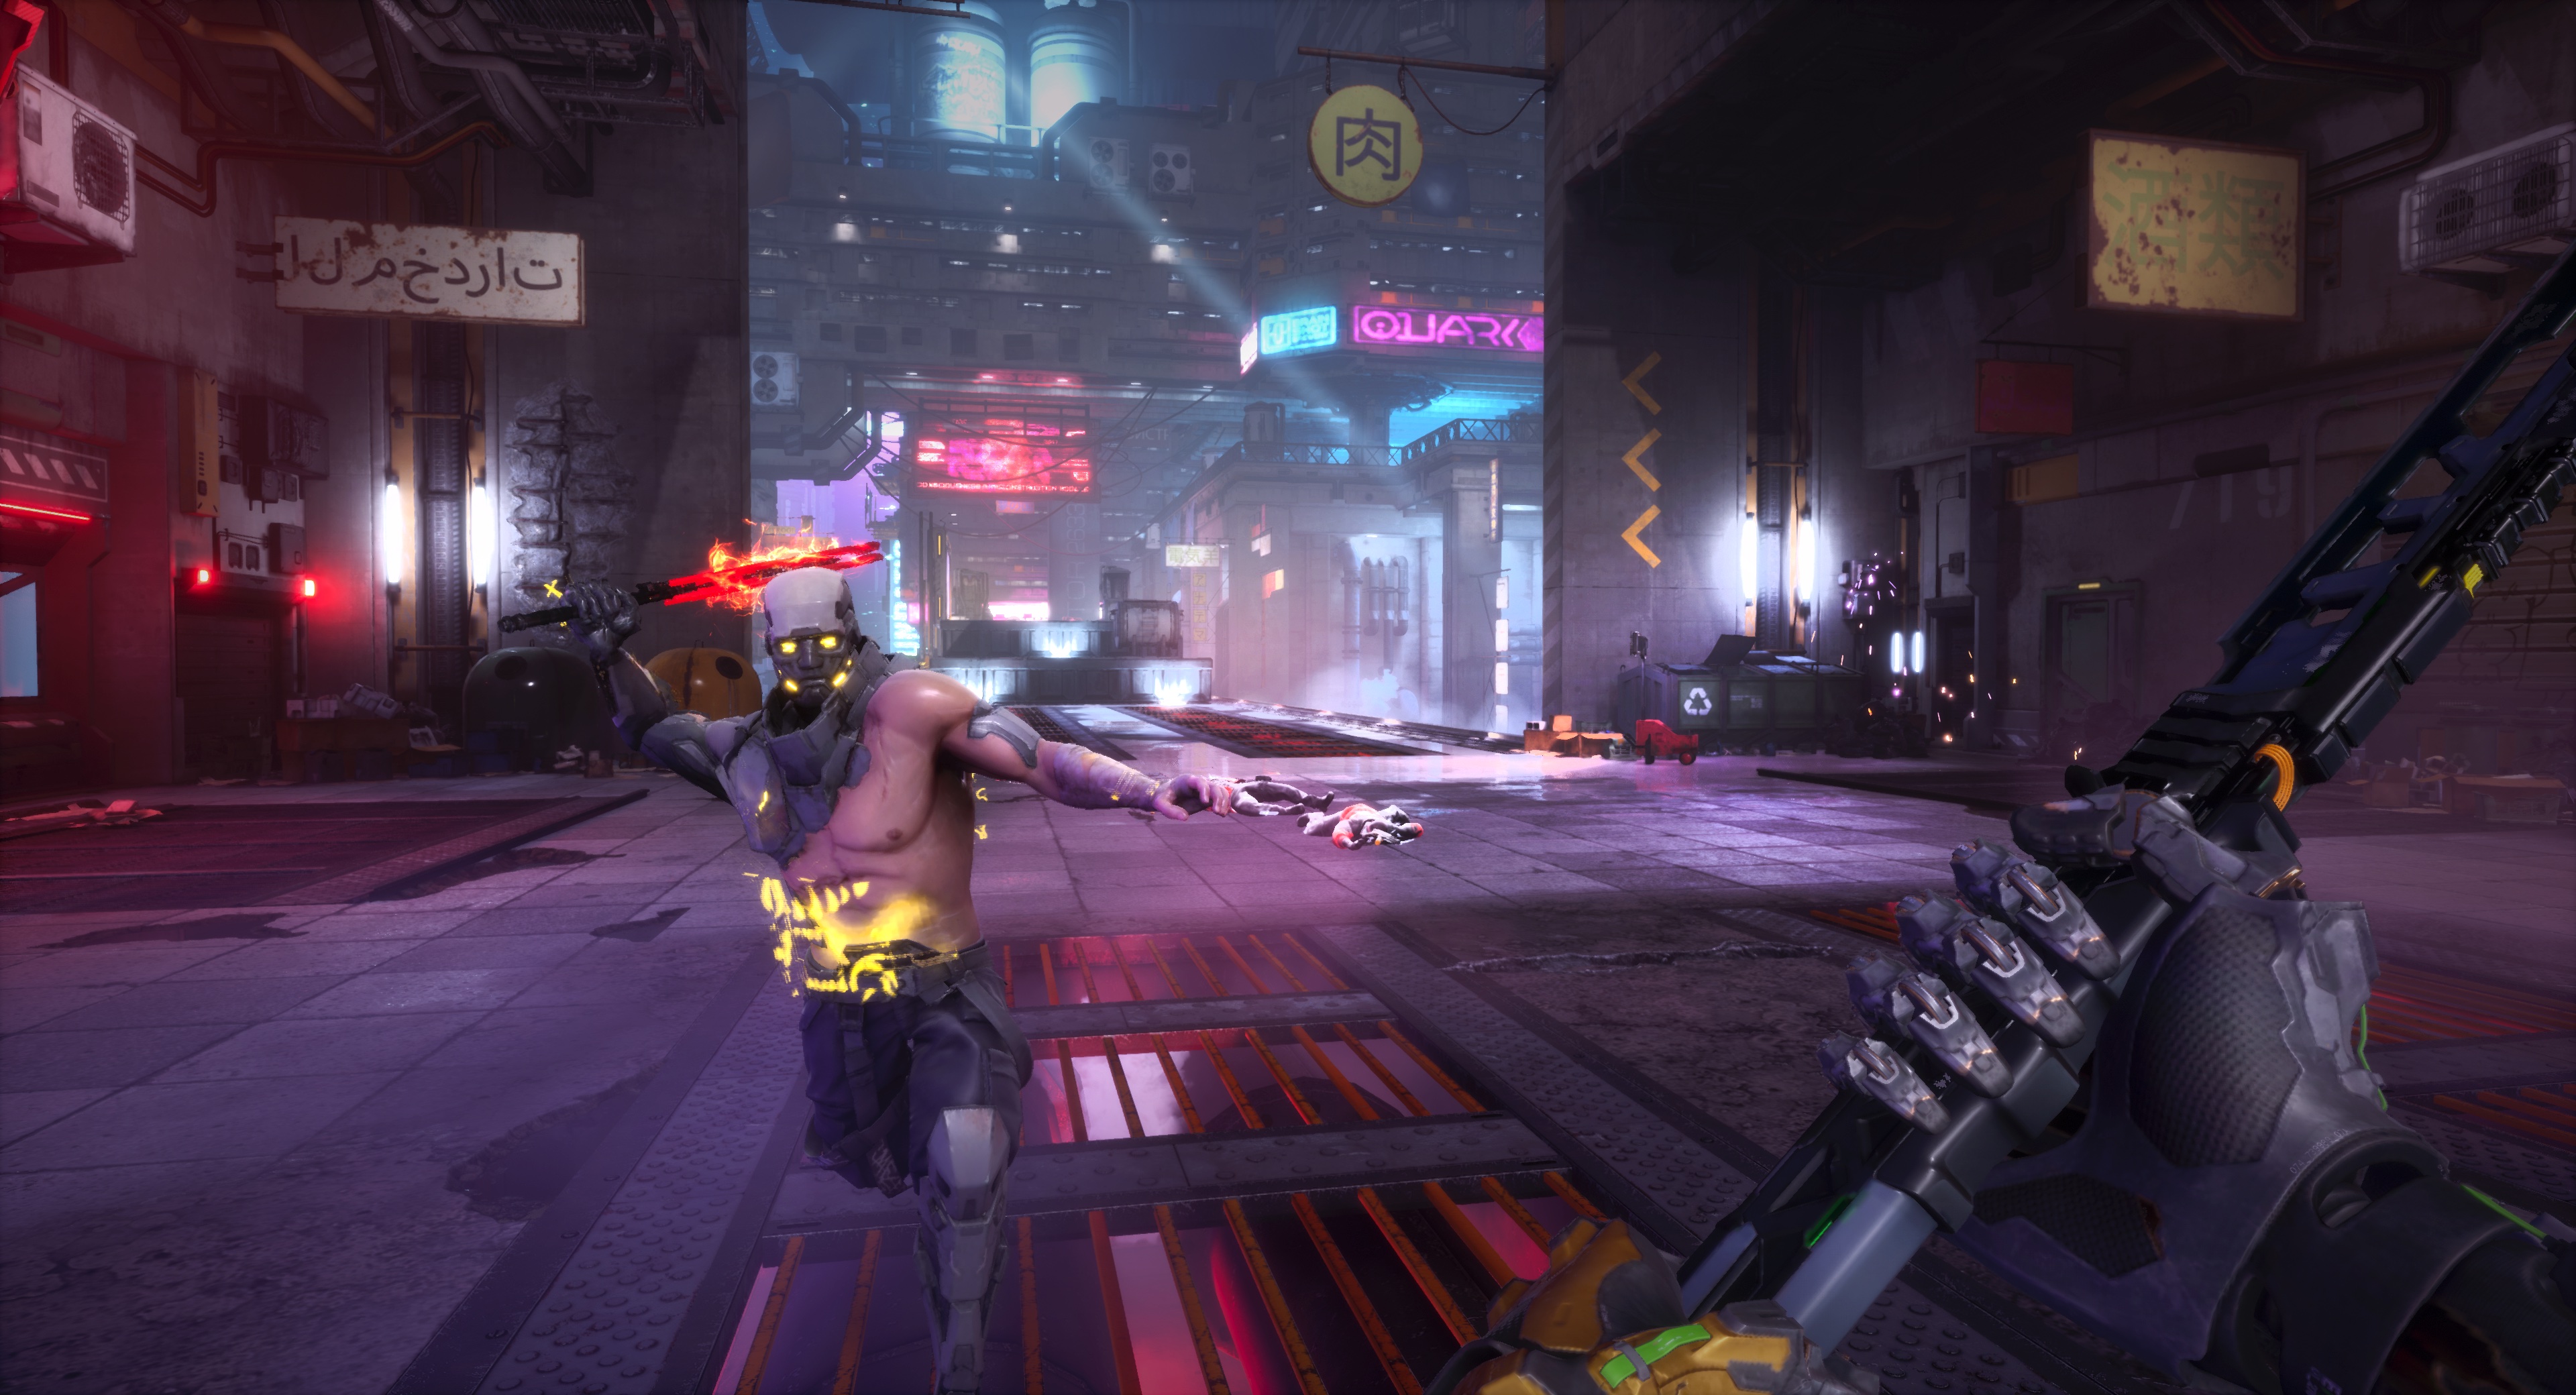 A screenshot from Ghostrunner 2, featuring a first-person perspective shot of the player’s character holding a cybernetic sword as an enemy lunges at them with a bladed weapon.